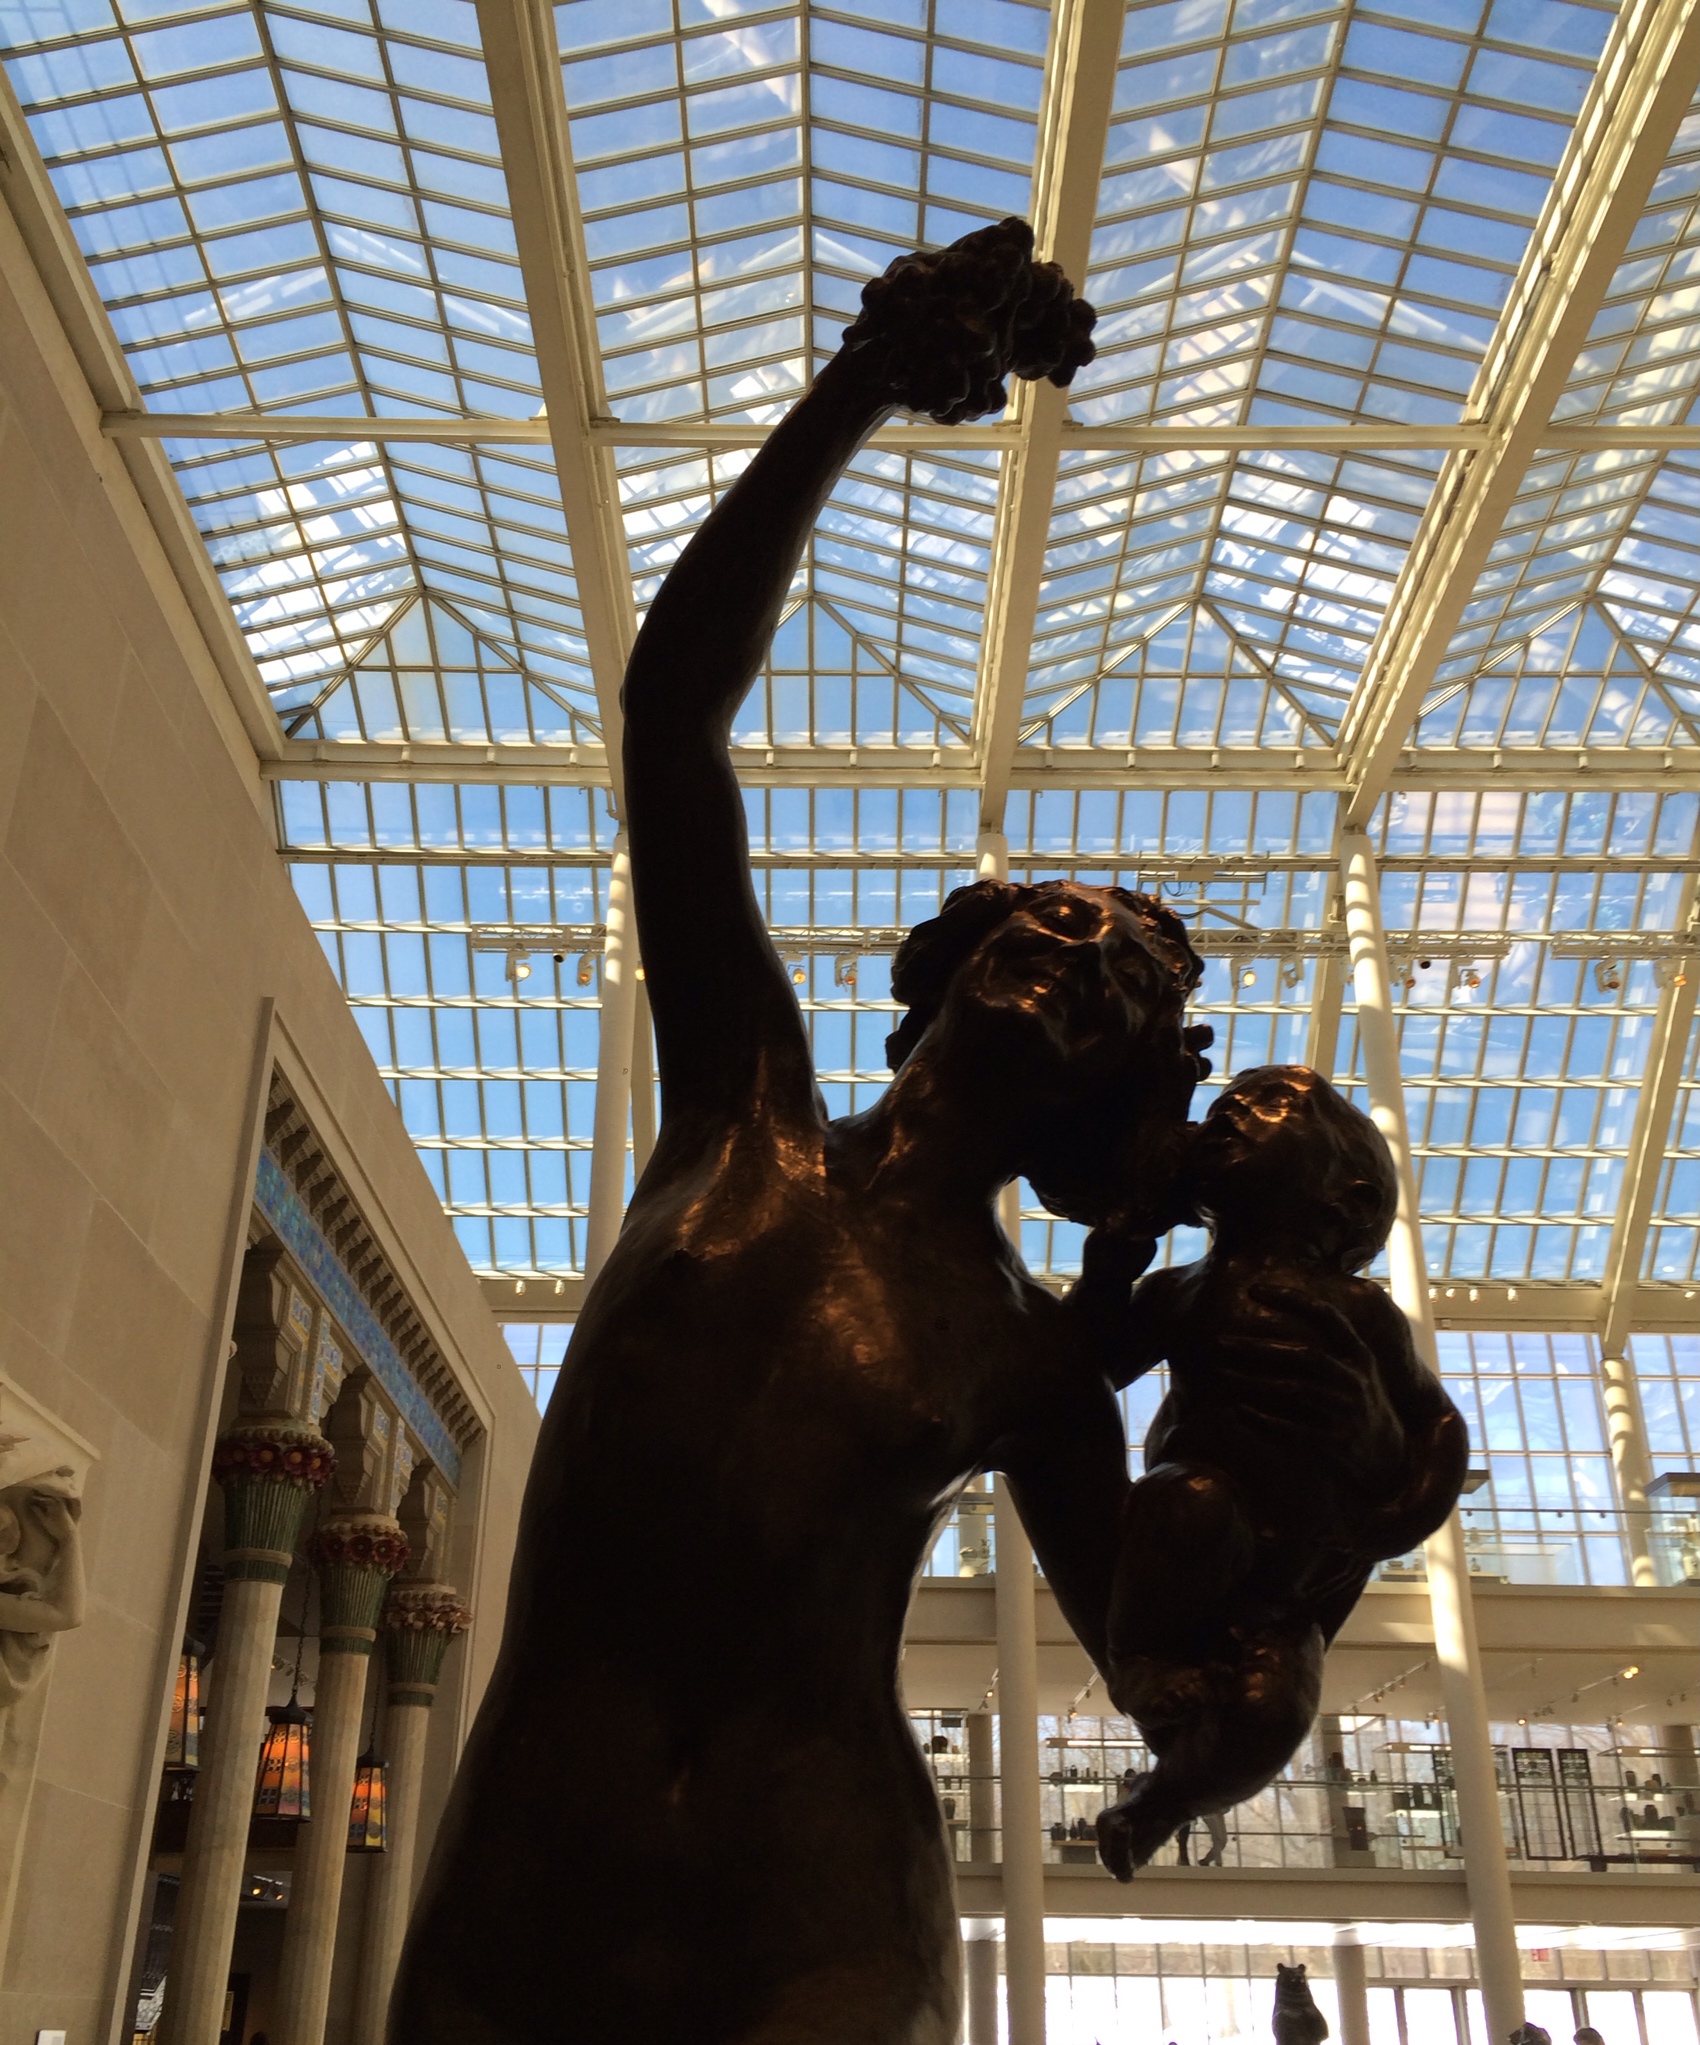 Frederick William McMonnies' Bacchante and Infant Faun, American Wing - The Charles Engelhard Court, The Met